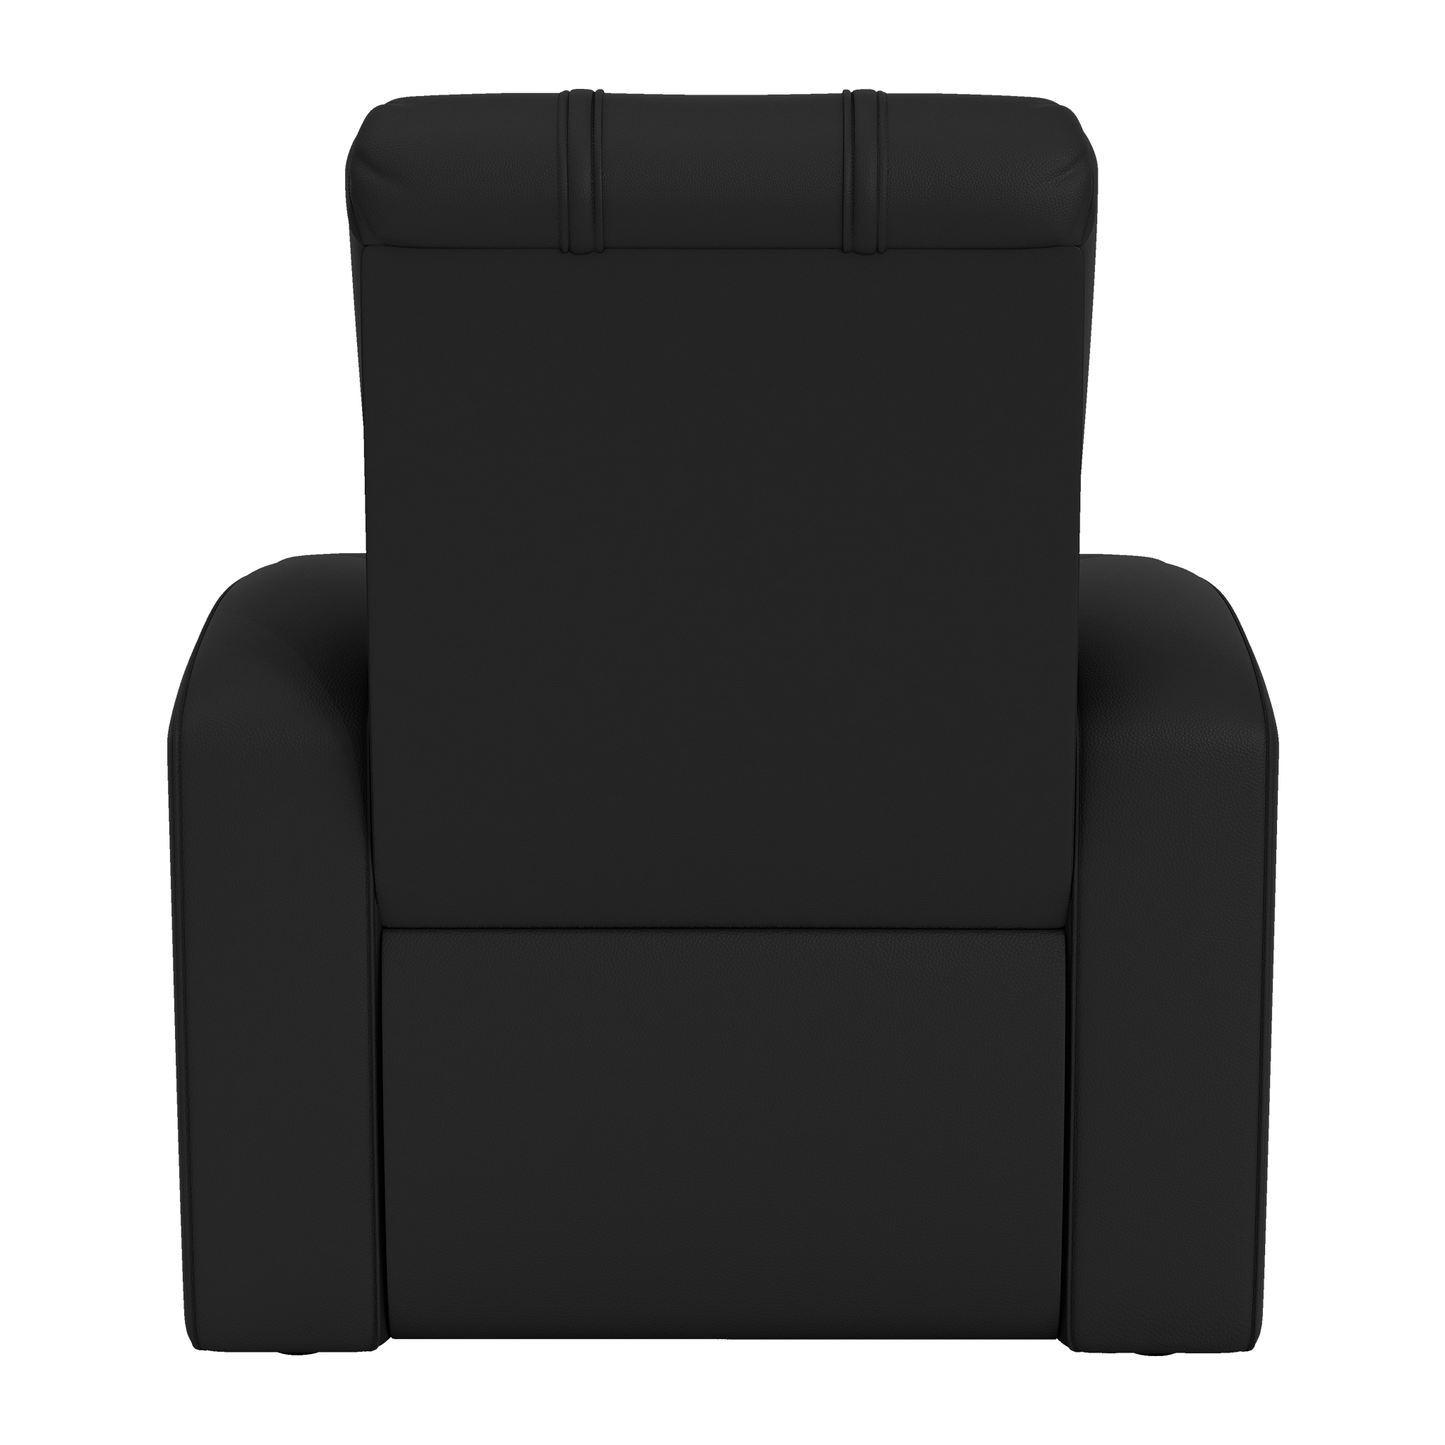 Relax Home Theater Recliner with Texas A&M Aggies Primary Logo